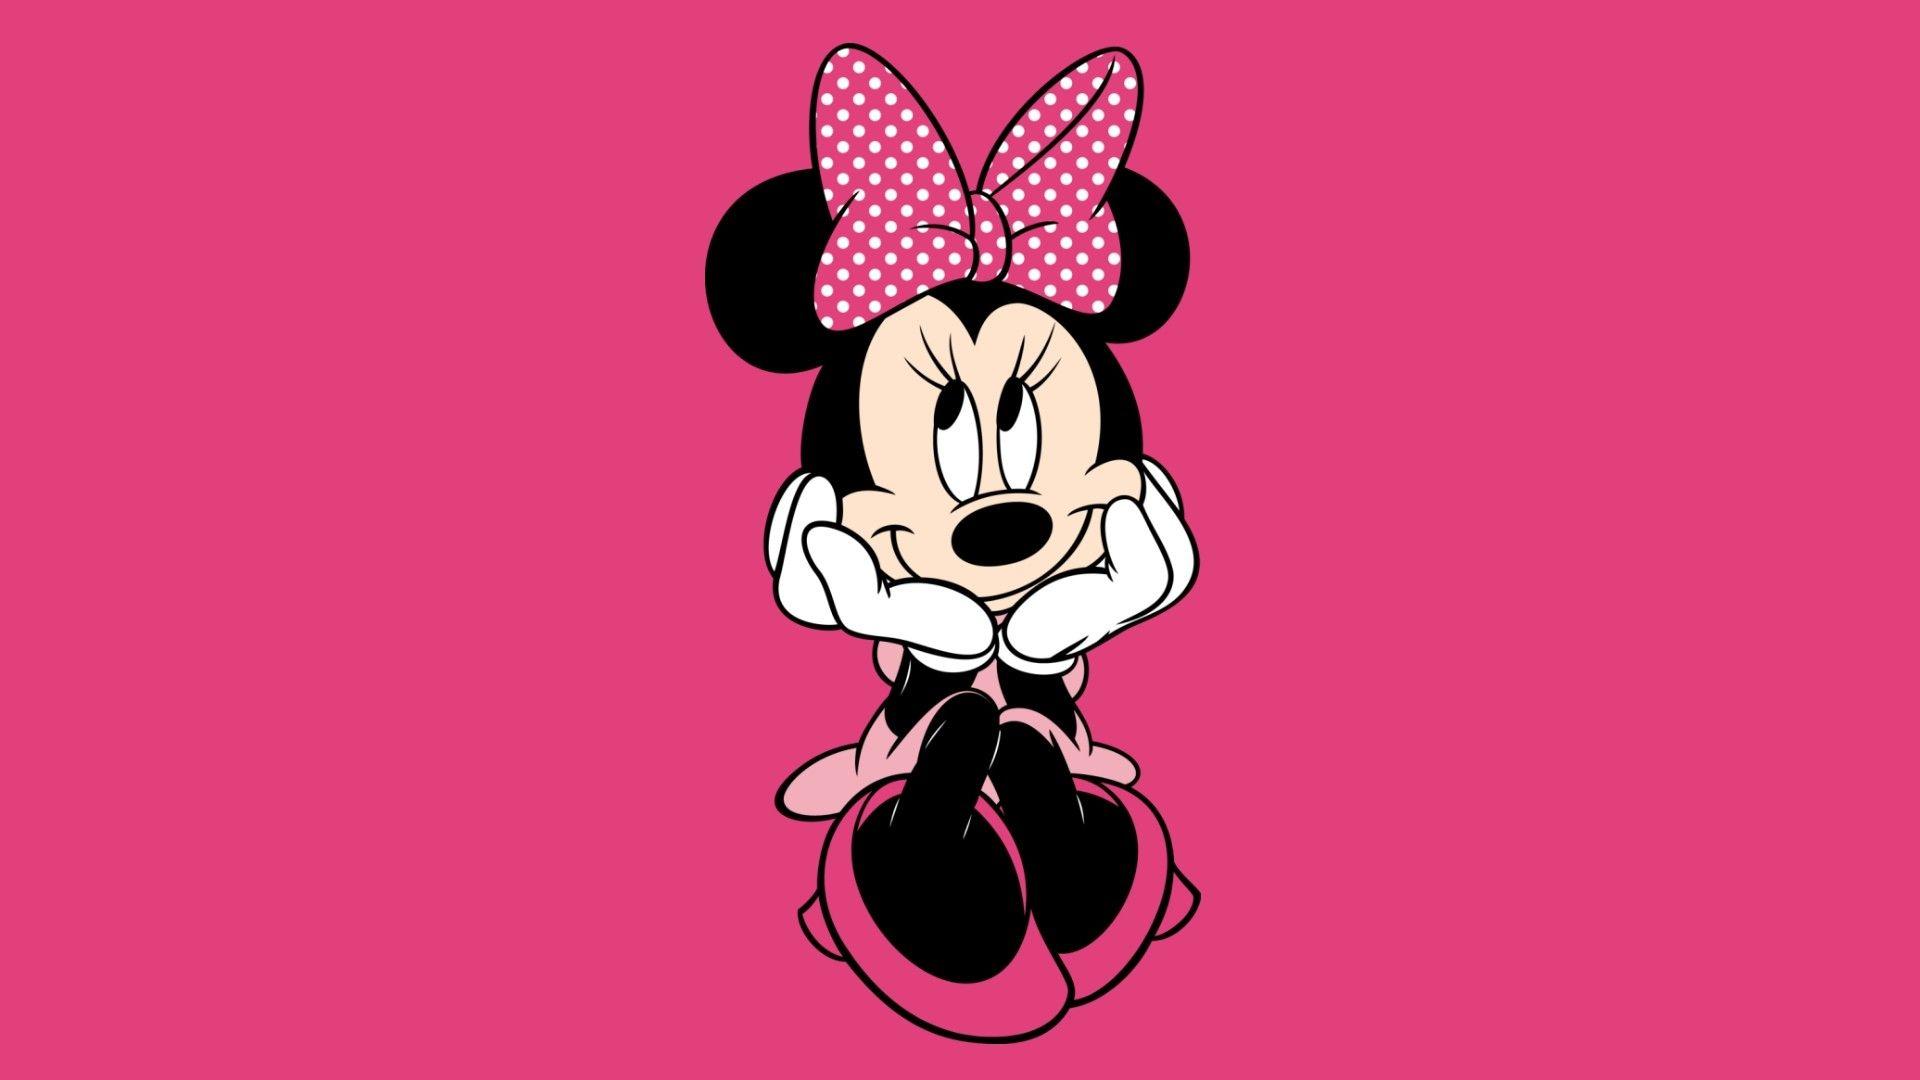 Pink Minnie Mouse Wallpapers - Top Free